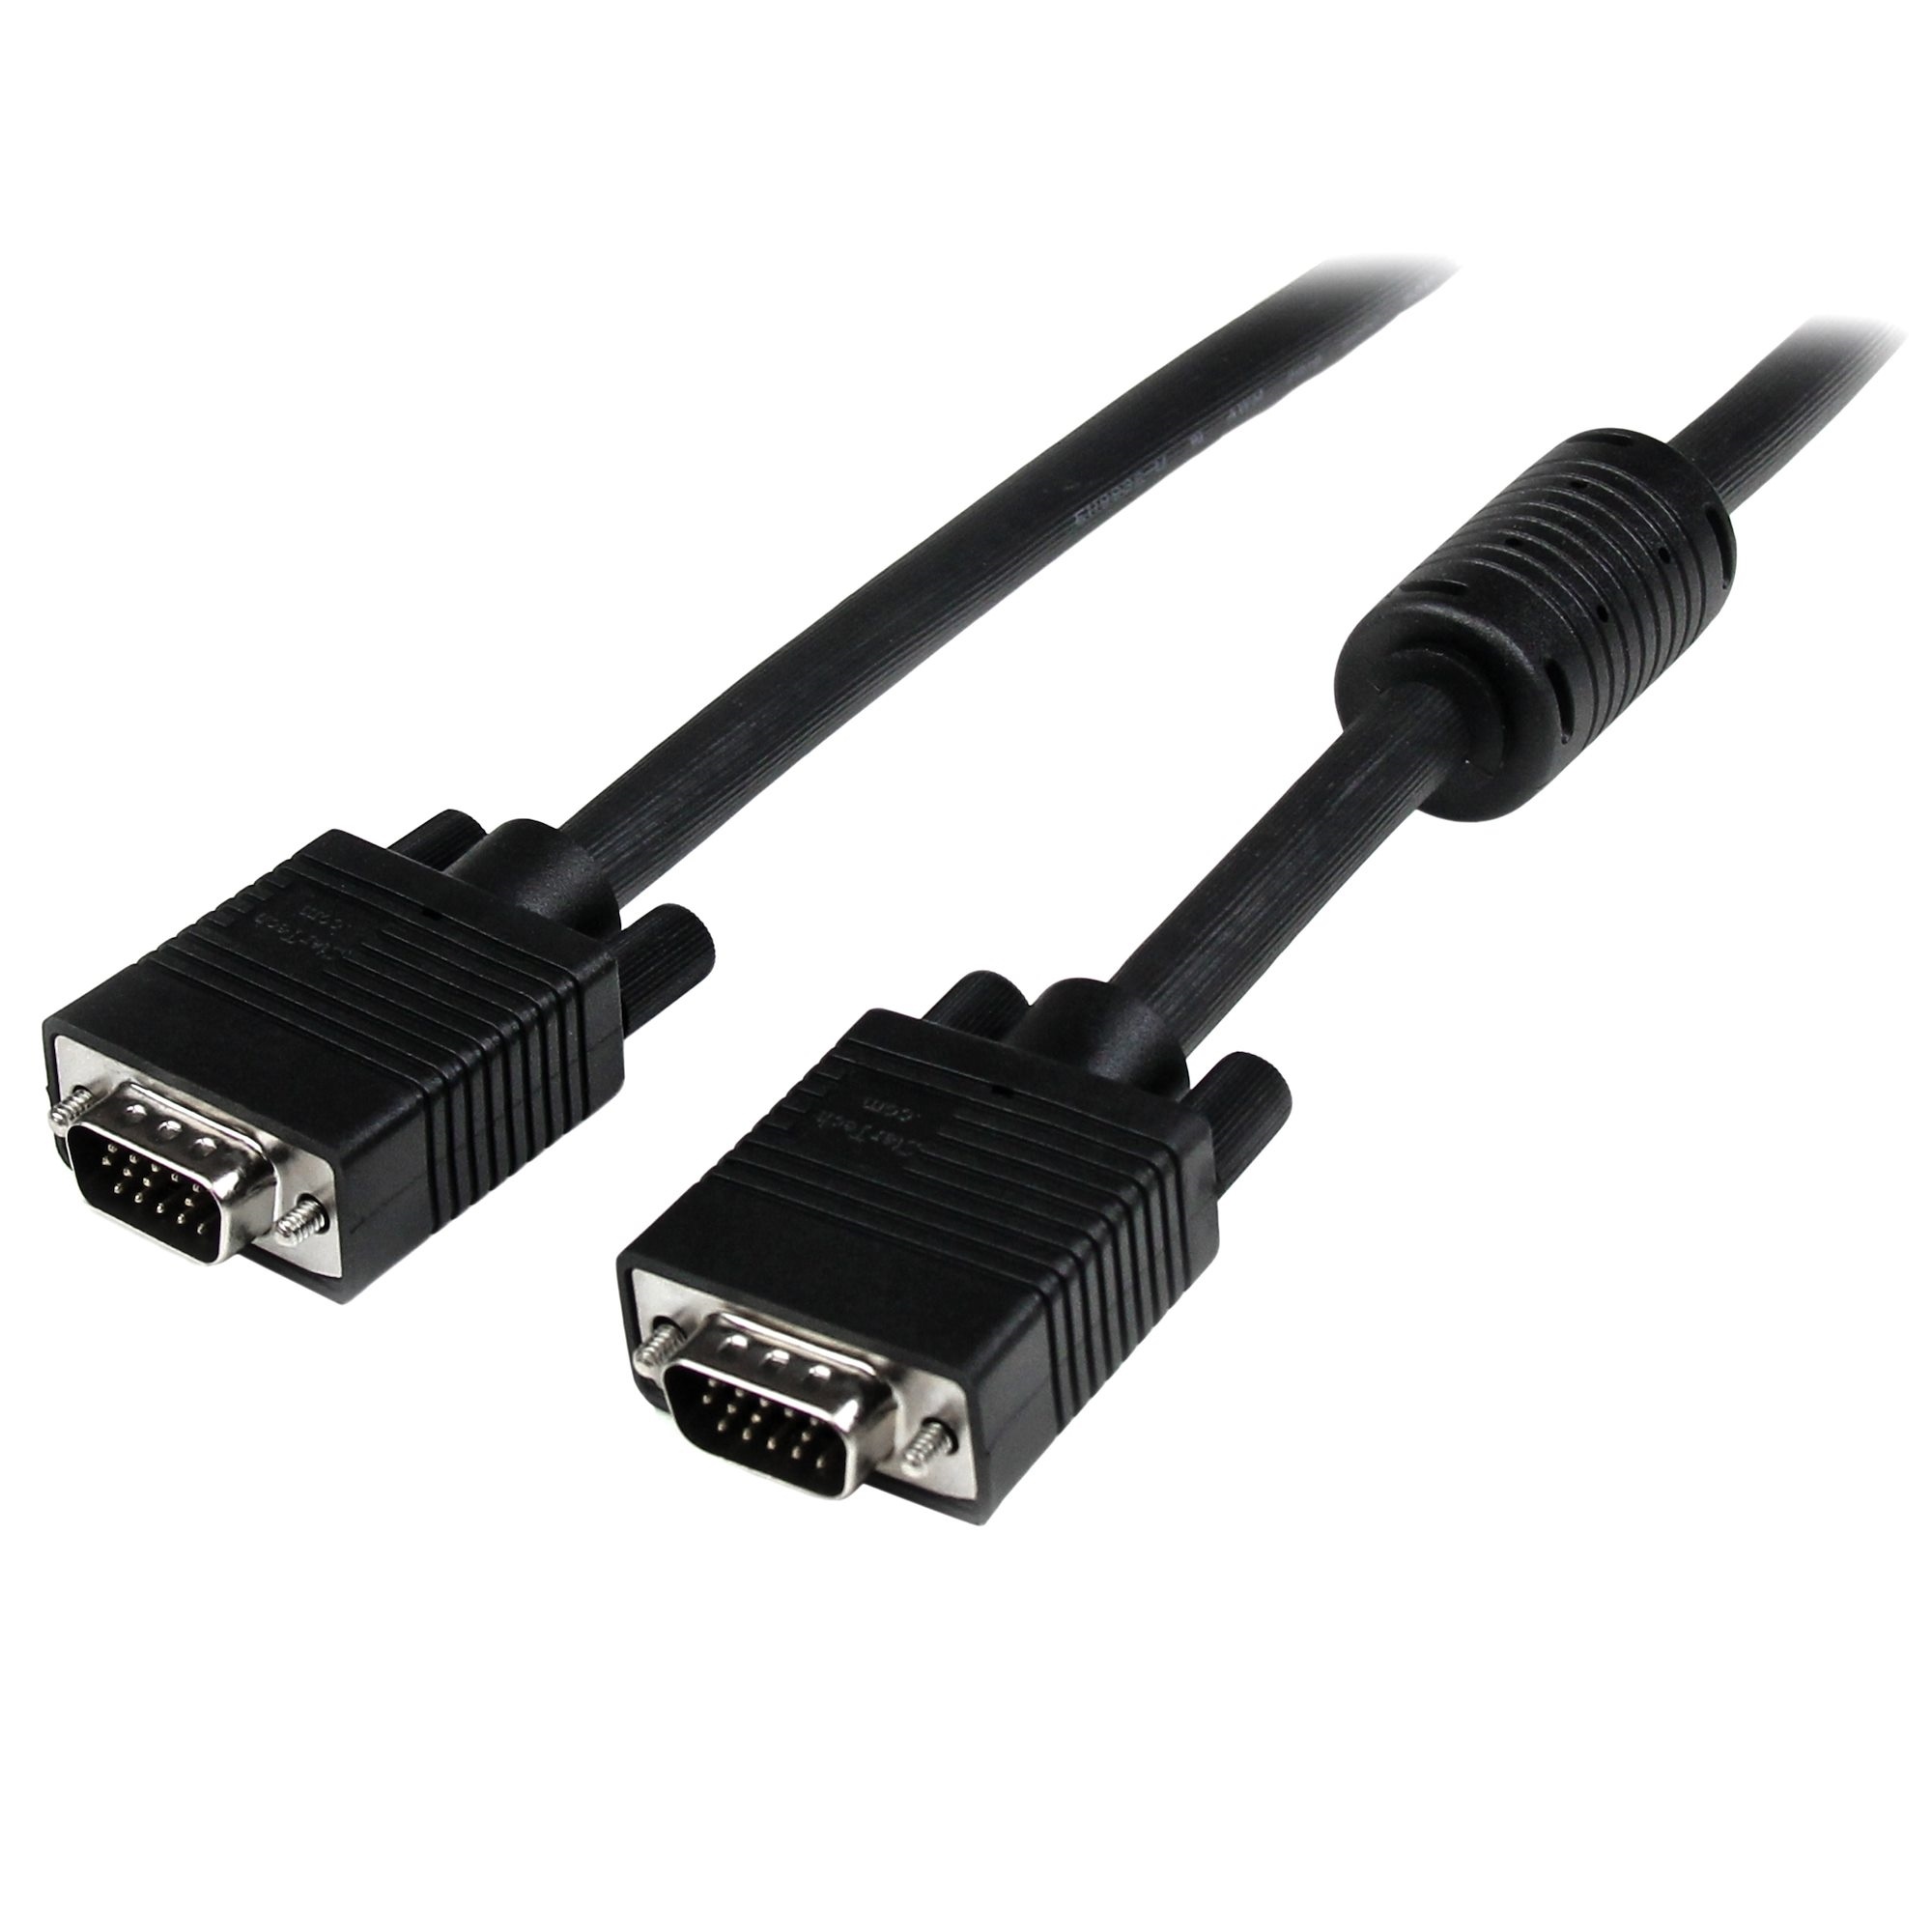 StarTech Coax High Resolution VGA Video Cable (7m)